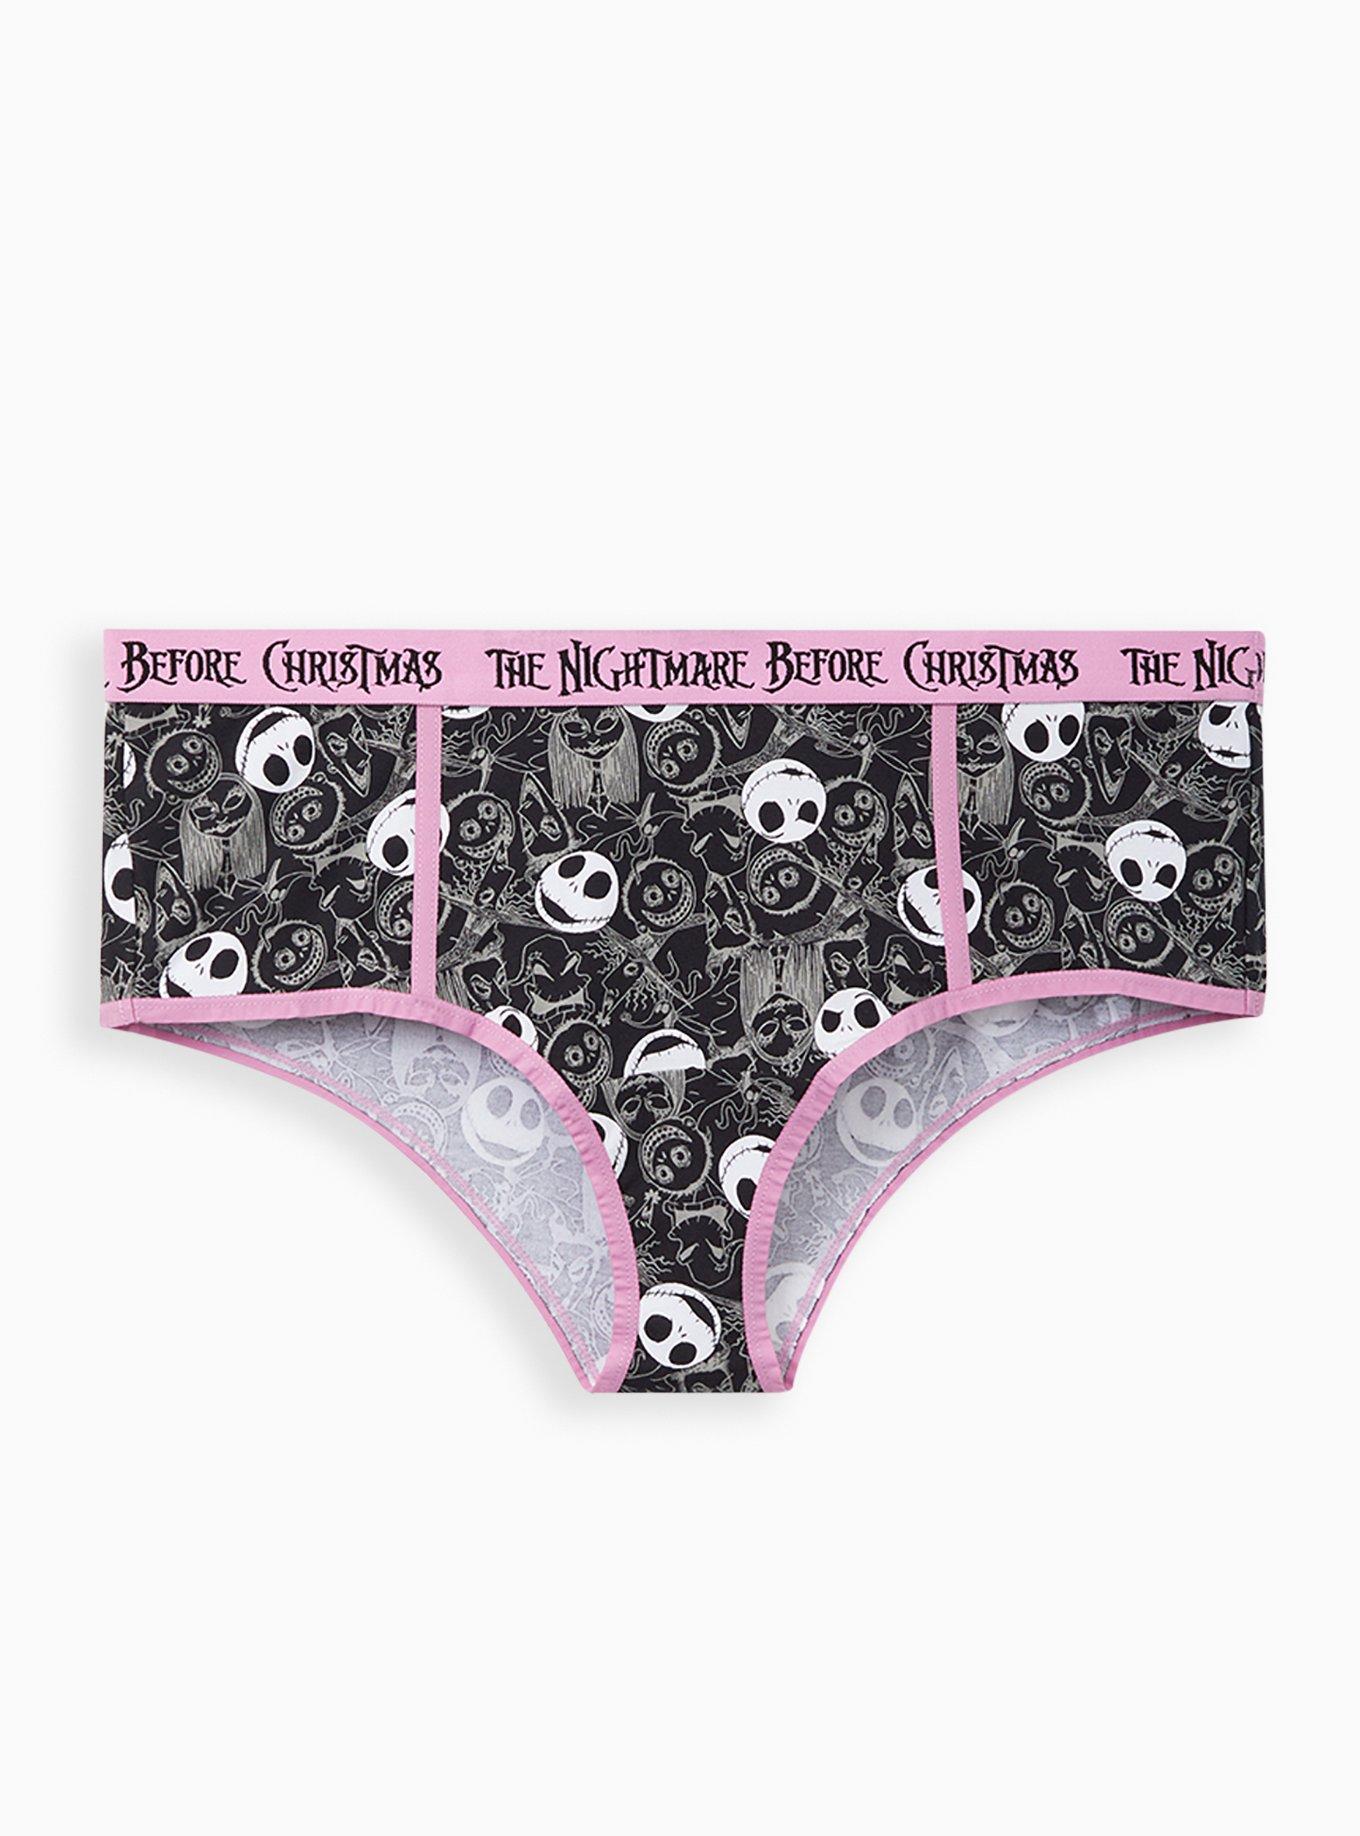 Cotton Essentials Lace-Trim Cheeky Panty in Multi & Pink